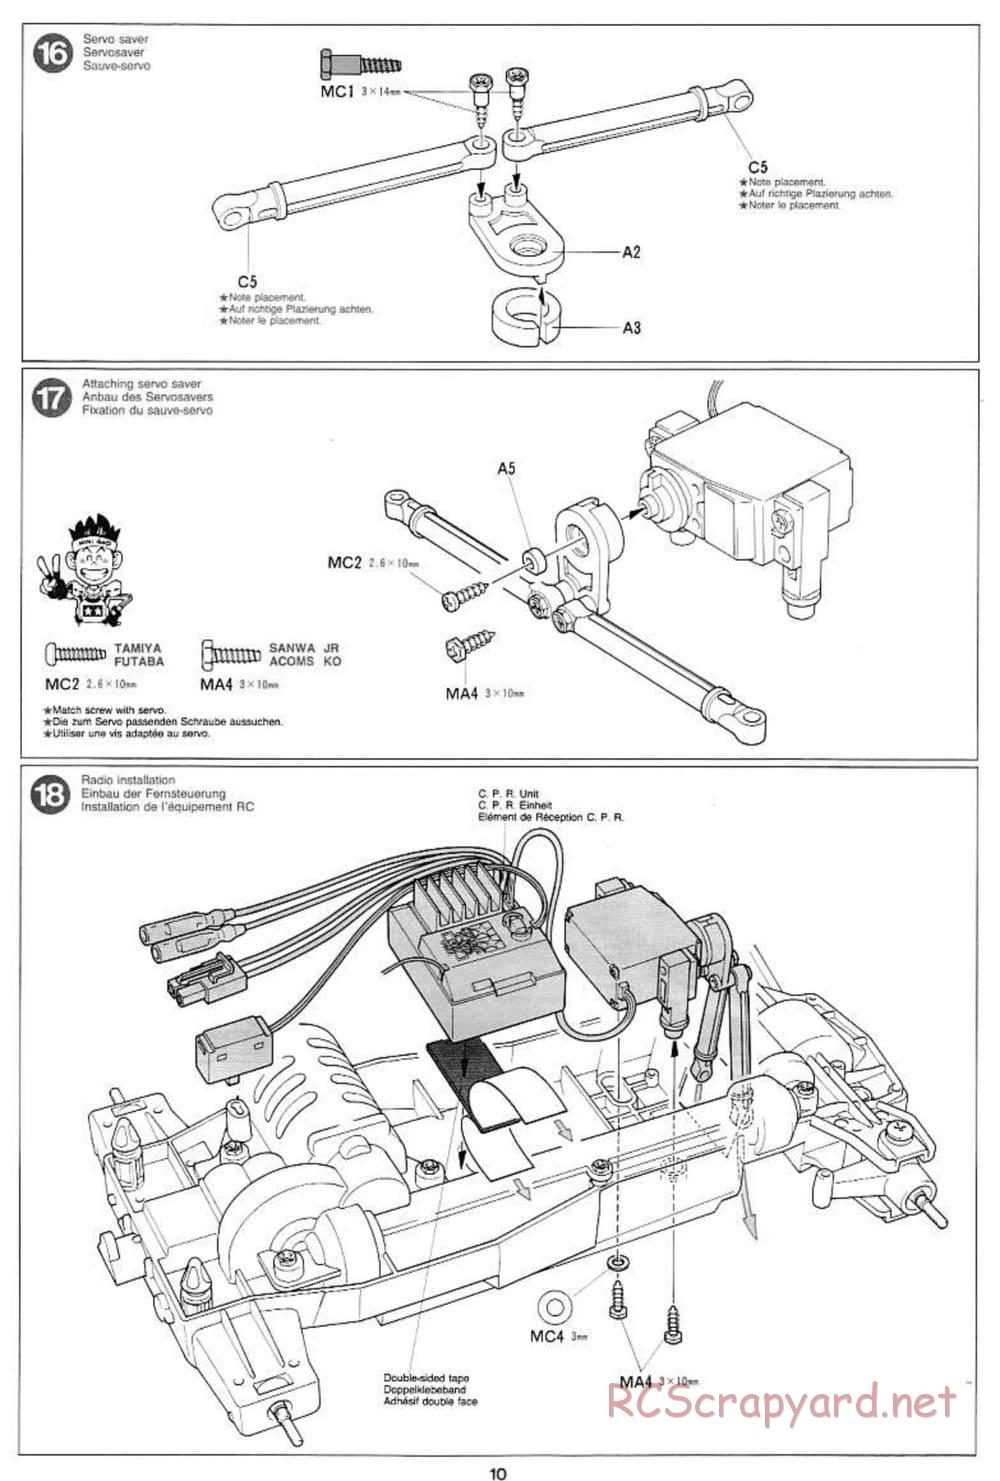 Tamiya - Voltec Fighter - Boy's 4WD Chassis - Manual - Page 10